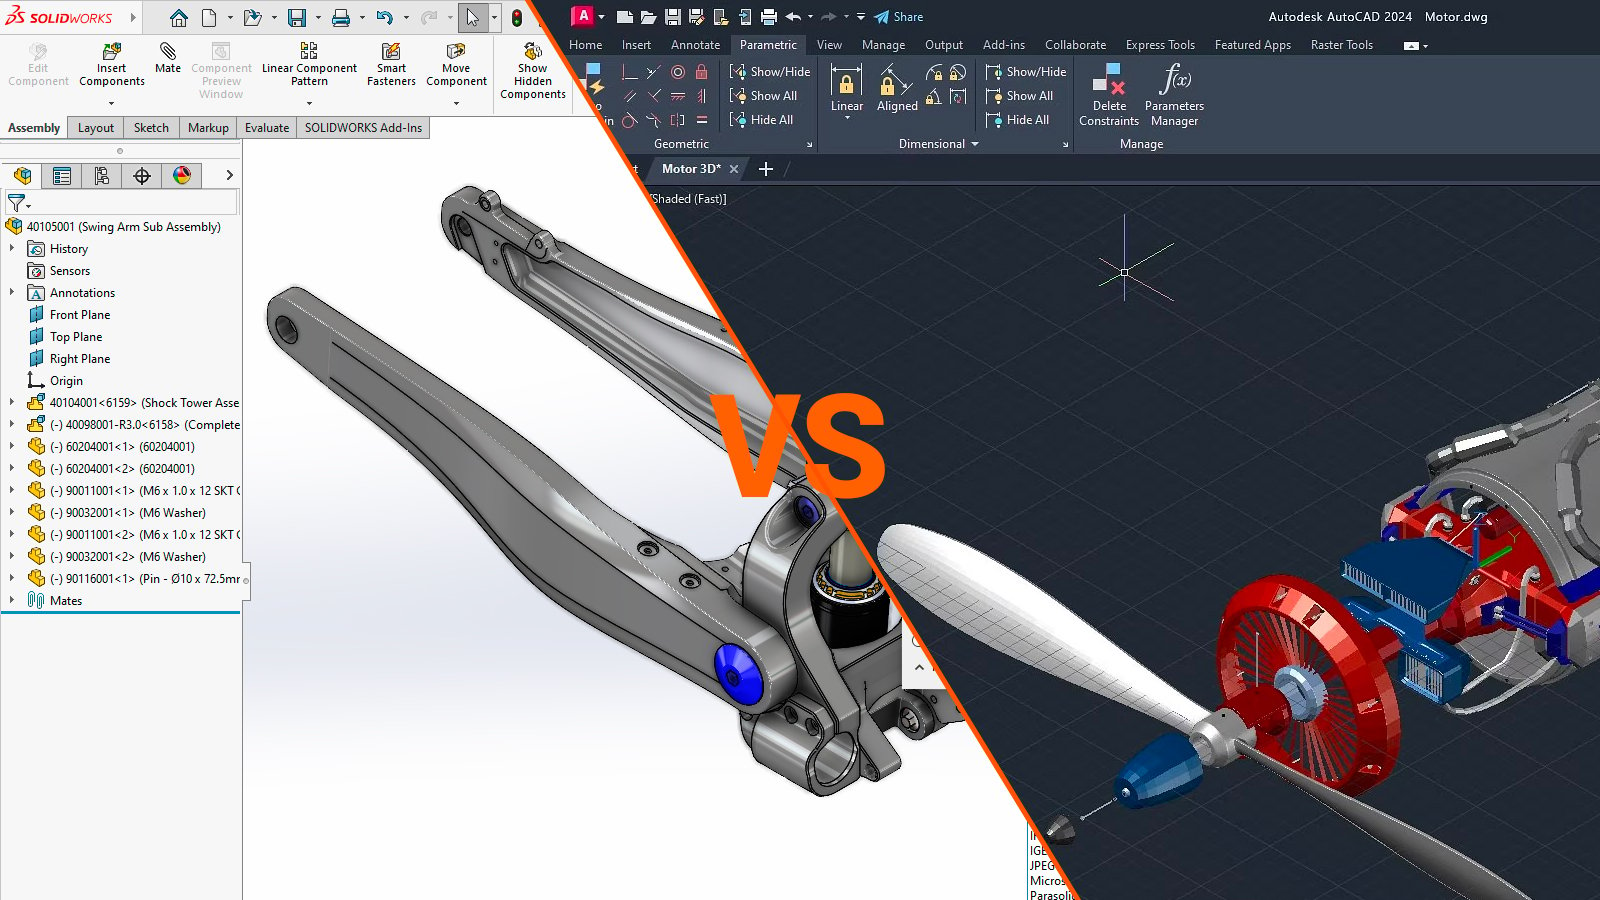 Can SolidWorks replace AutoCAD?